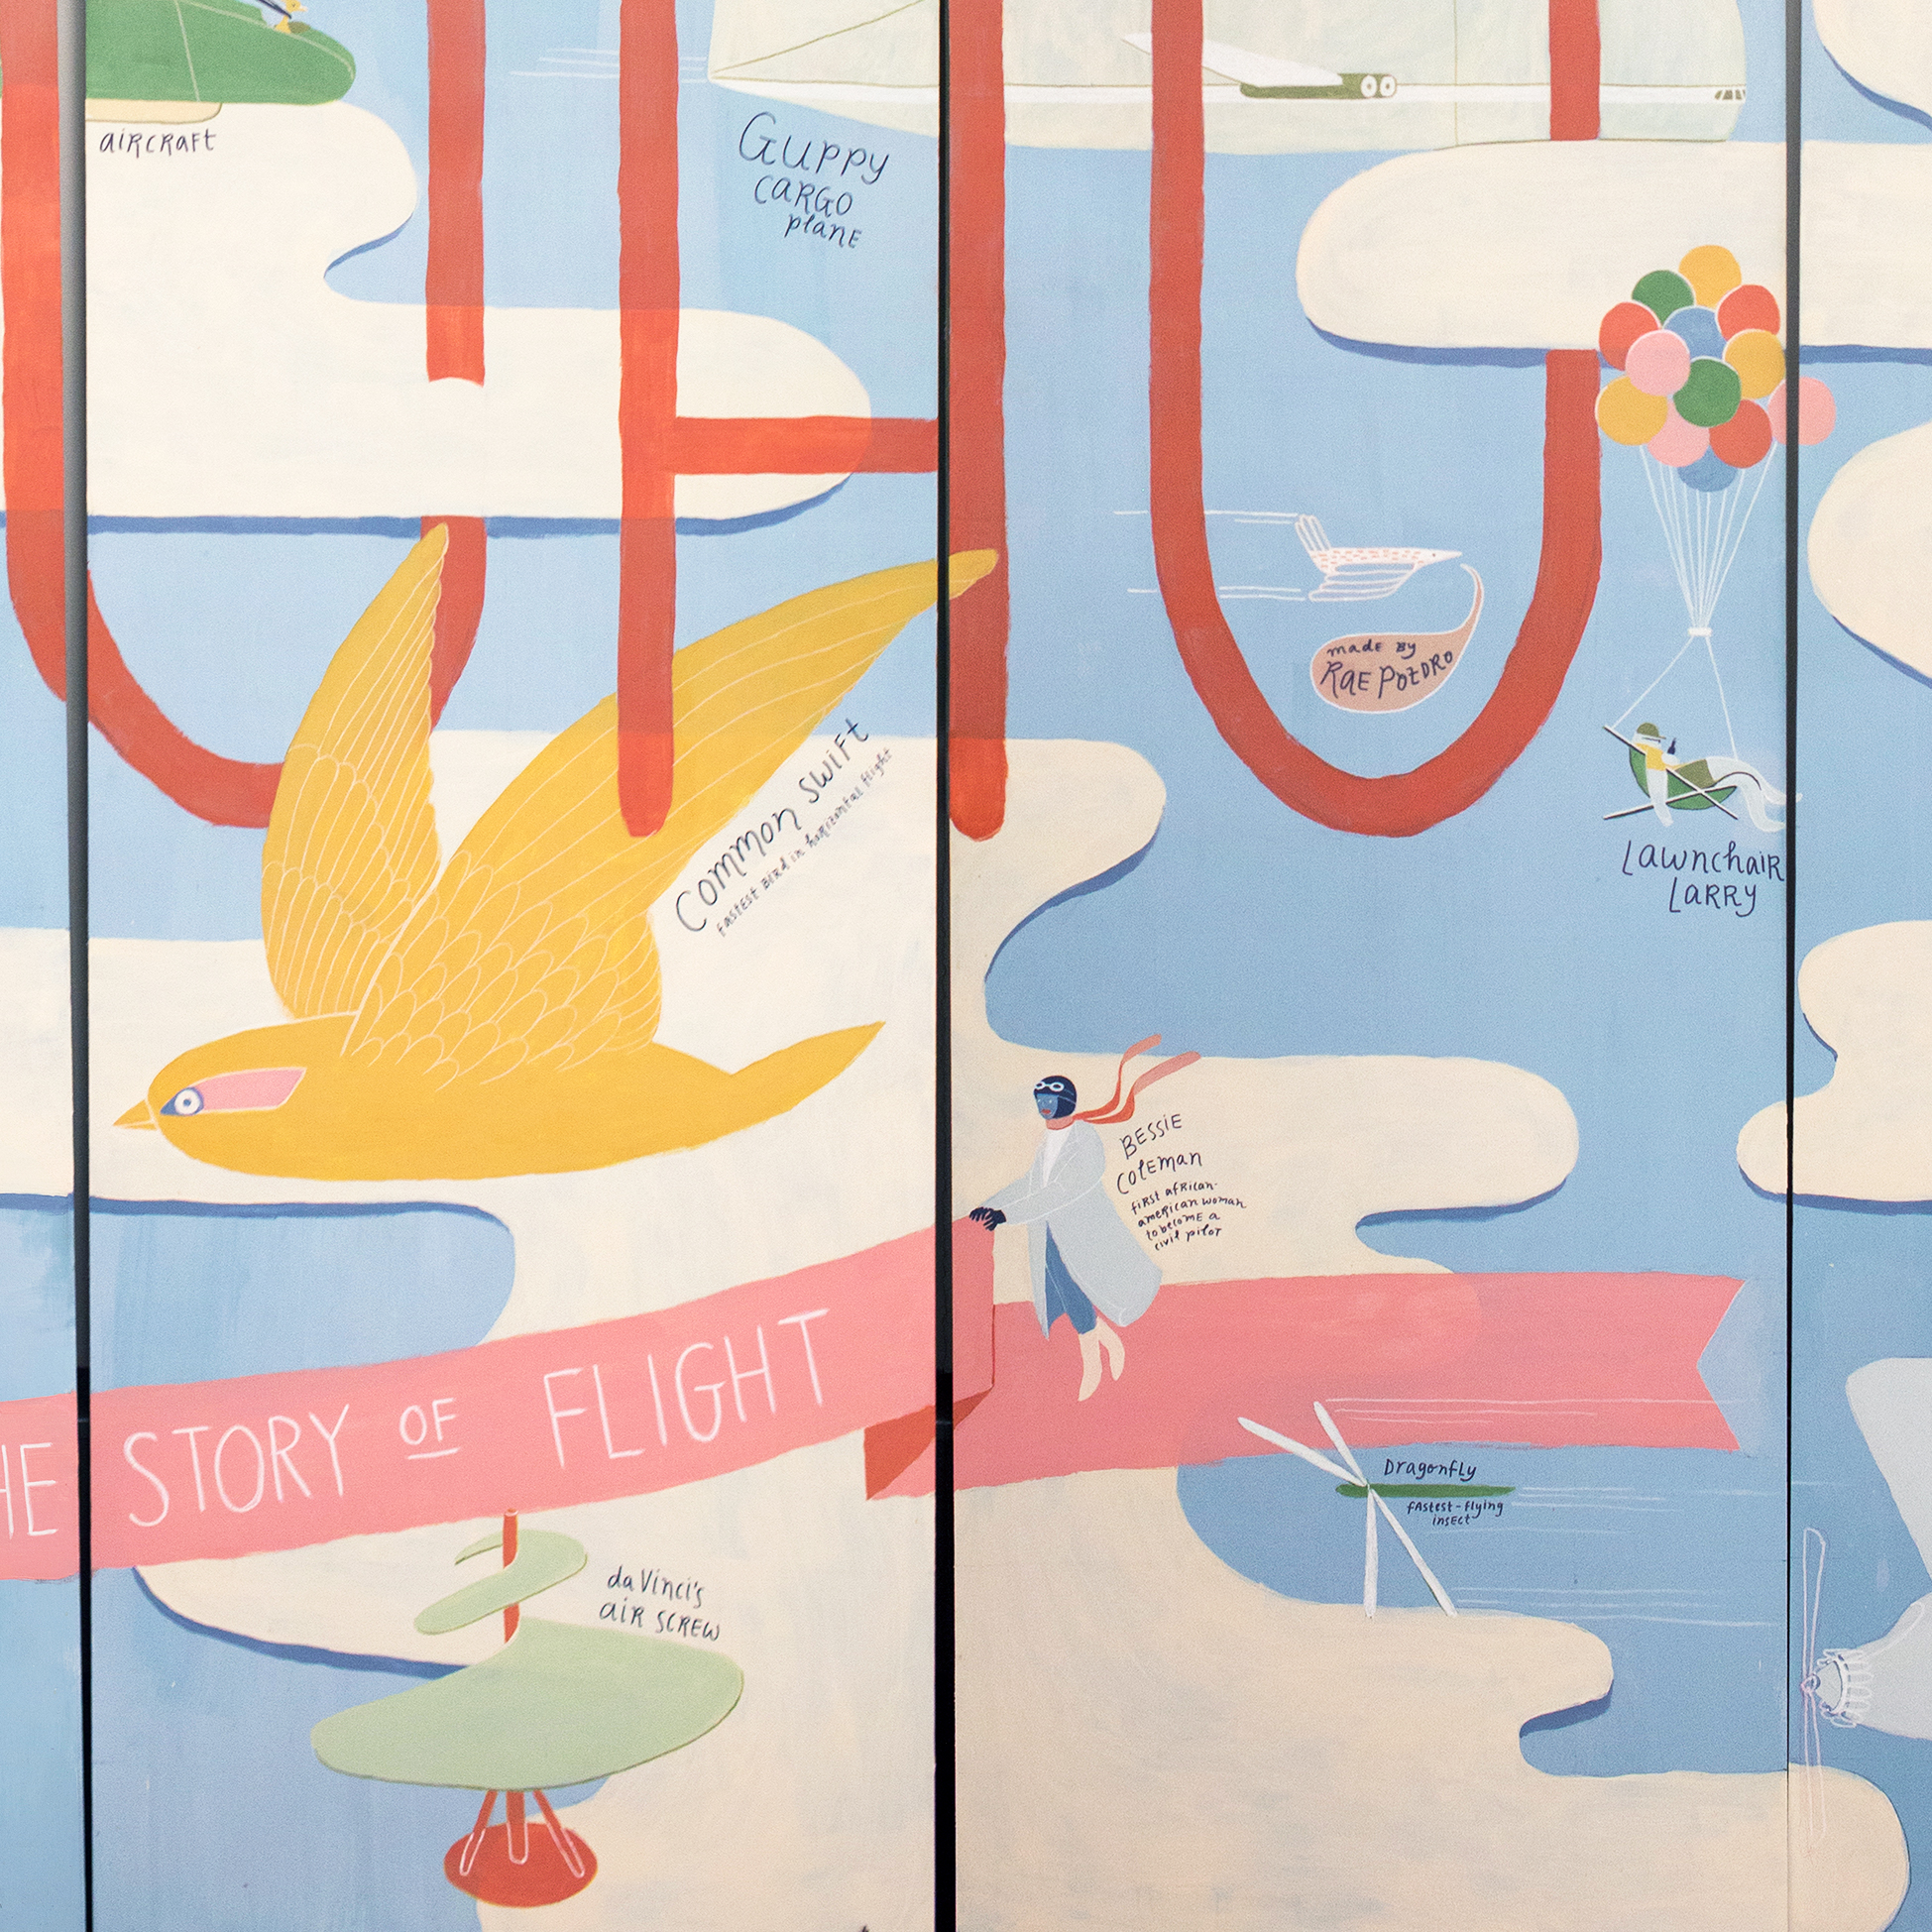    THE STORY OF FLIGHT     Acrylic mural on wood panels commissioned for Aeronaut Brewing Co.    2019    